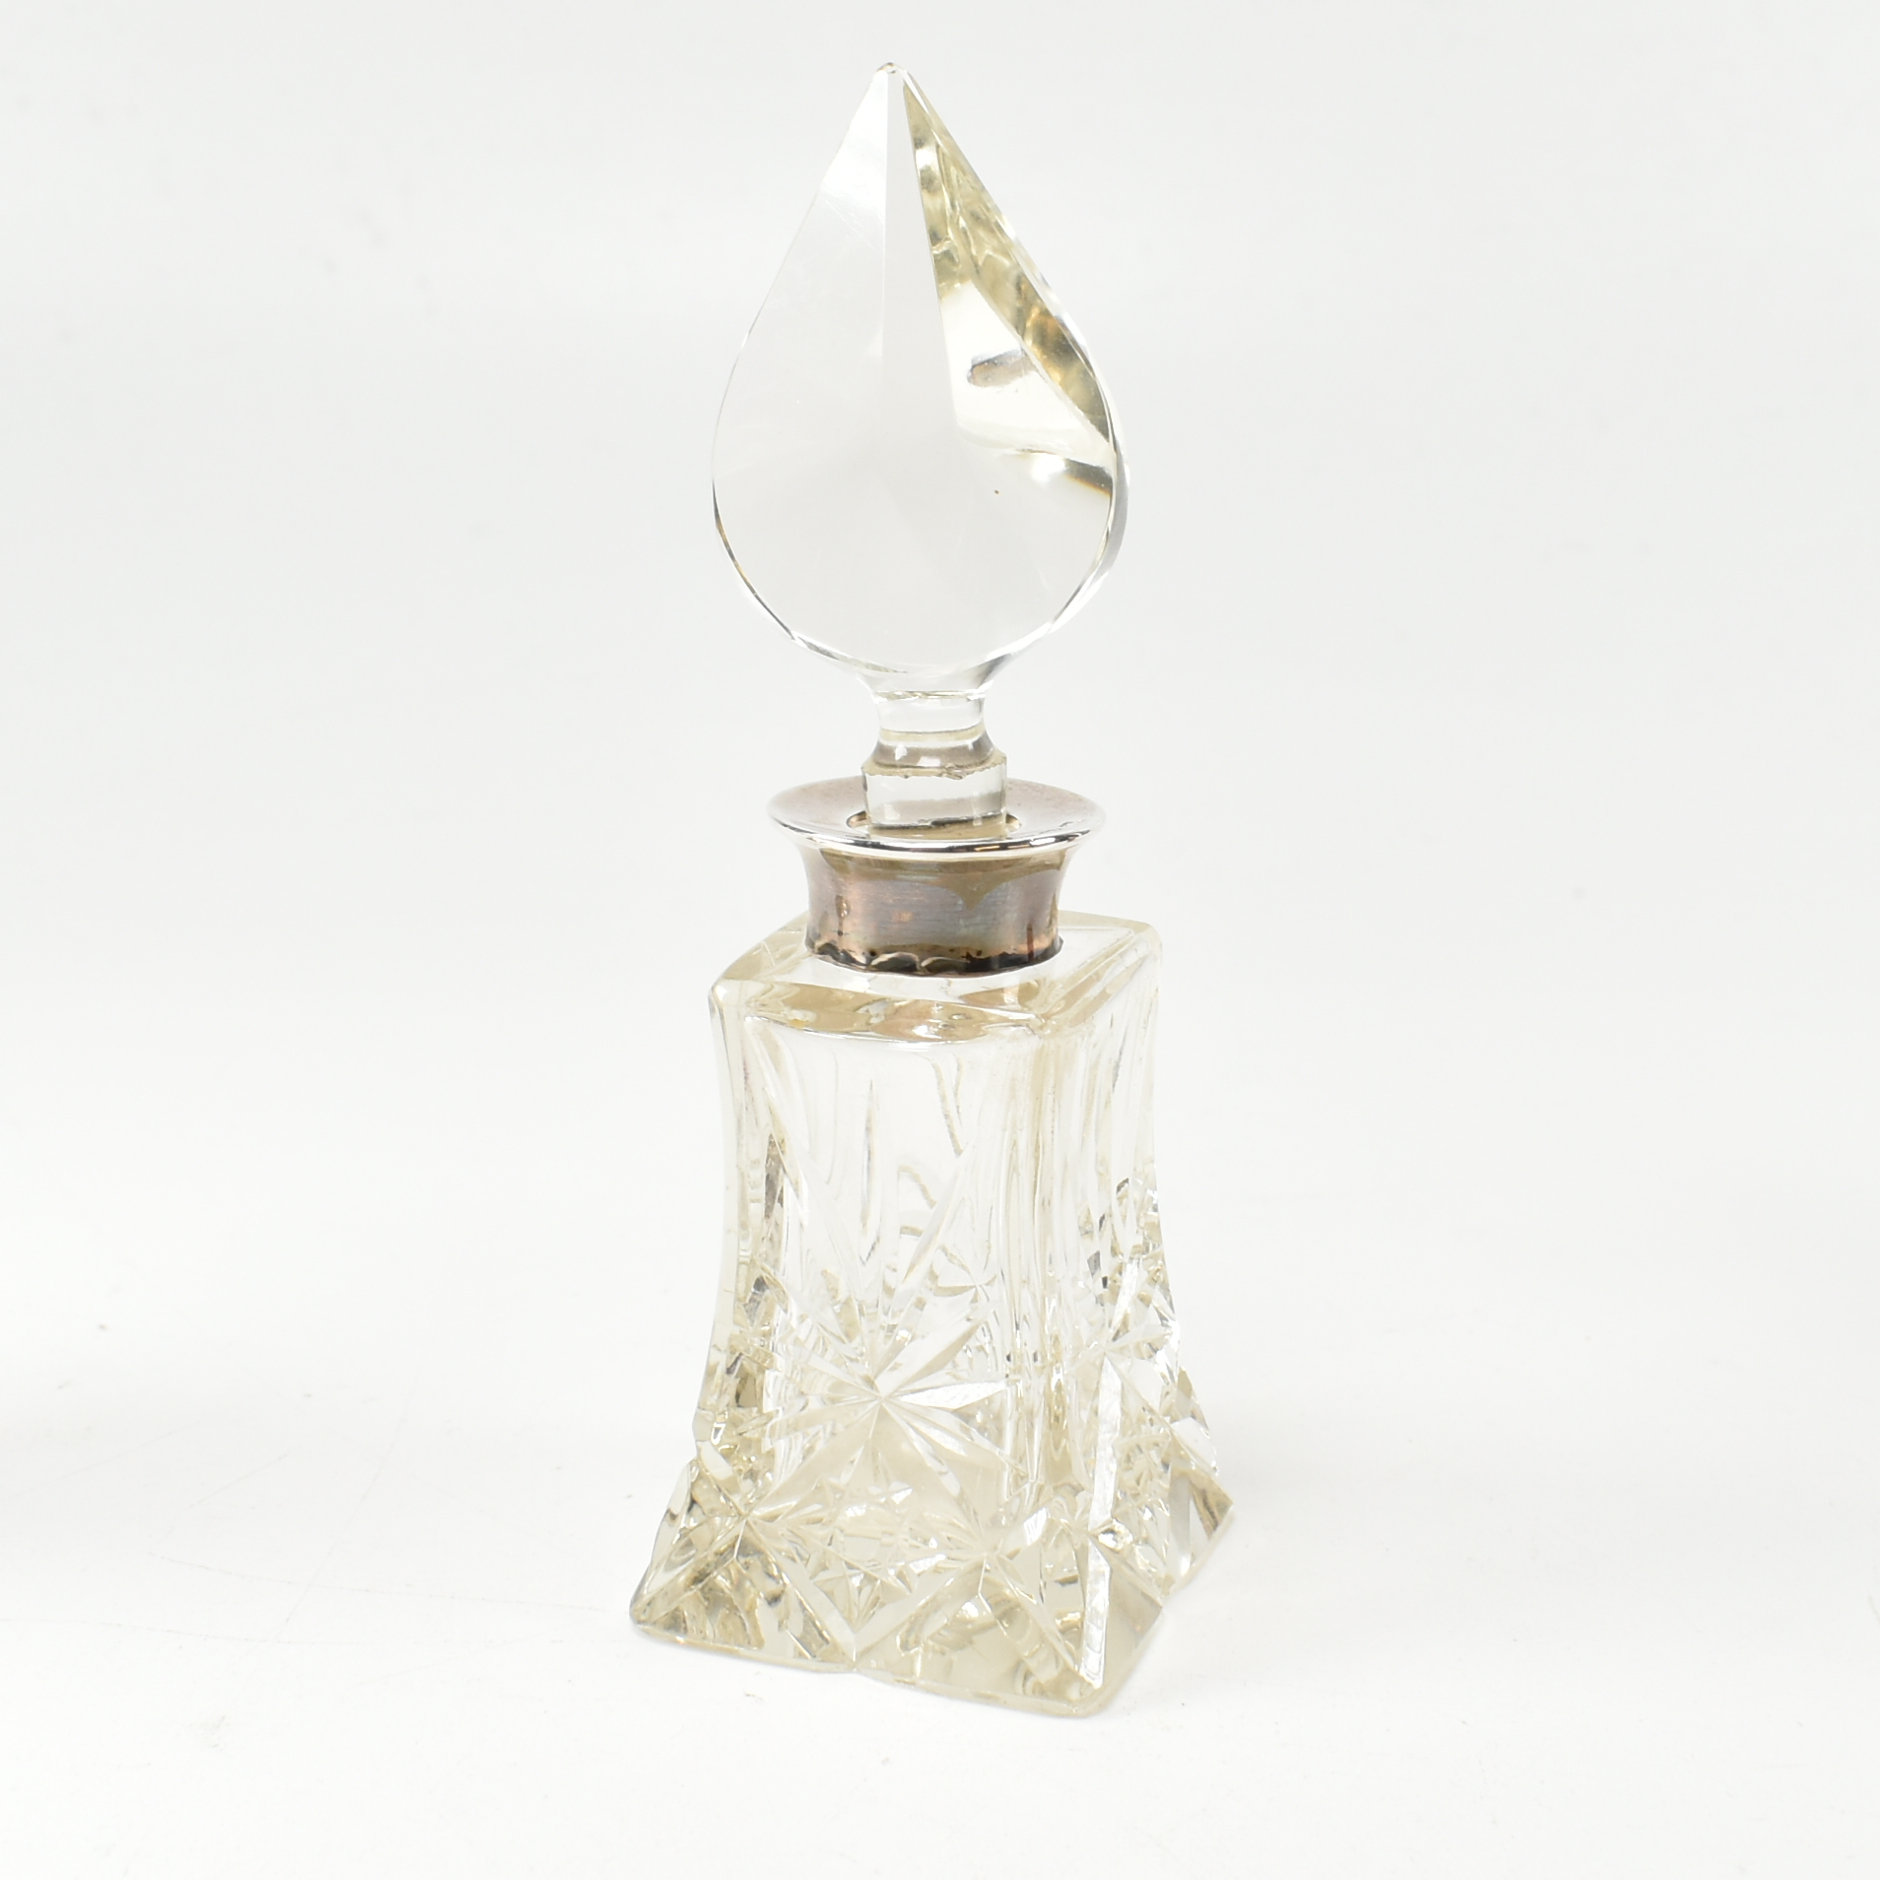 EARLY 20TH CENTURY HALLMARKED SILVER & CUT GLASS BOTTLES & VASE - Image 7 of 9